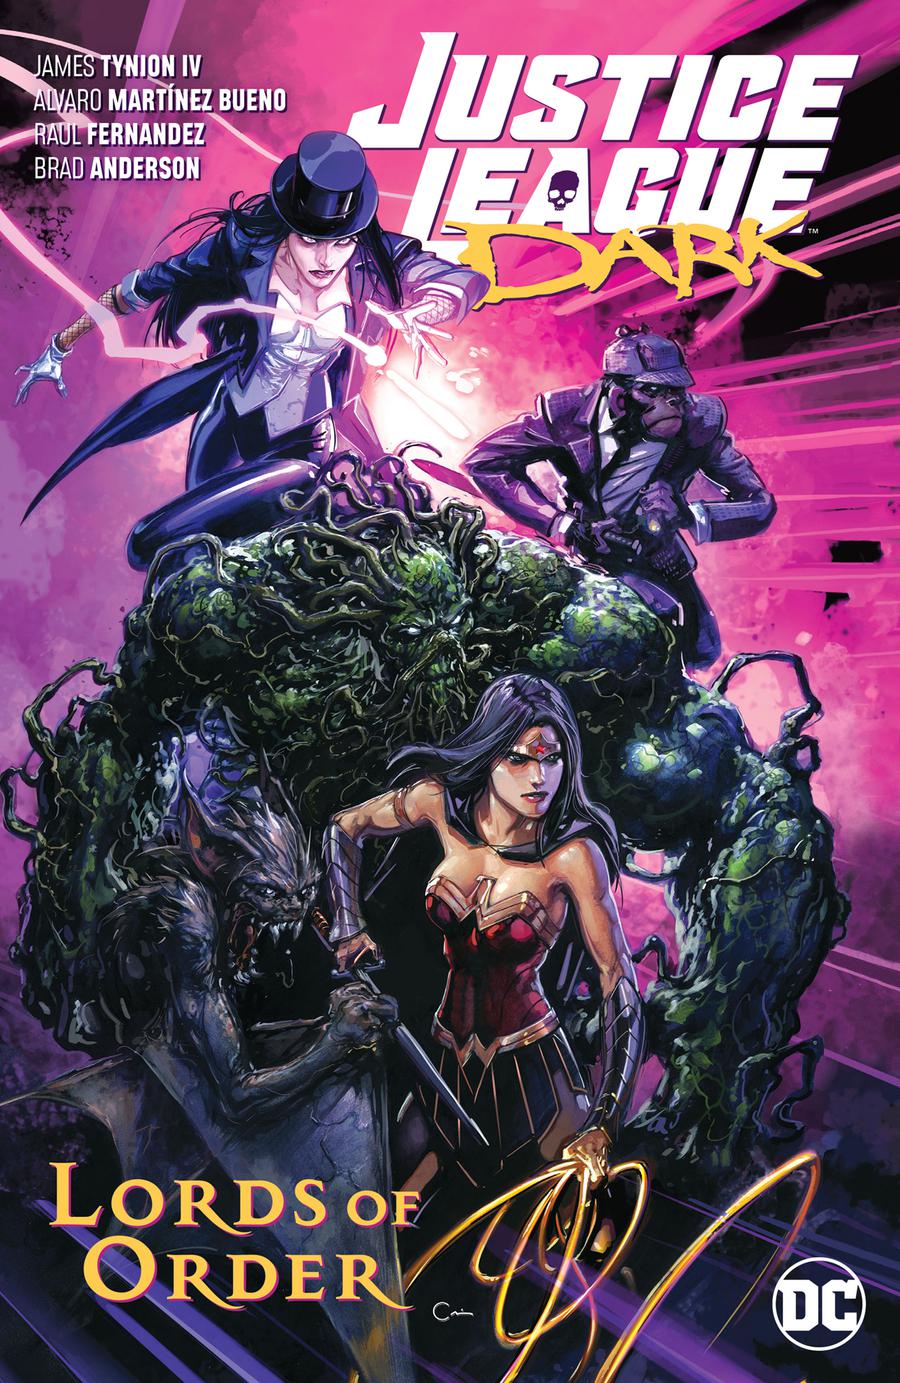 Justice League Dark (2018) Vol 2 Lords Of Order TP